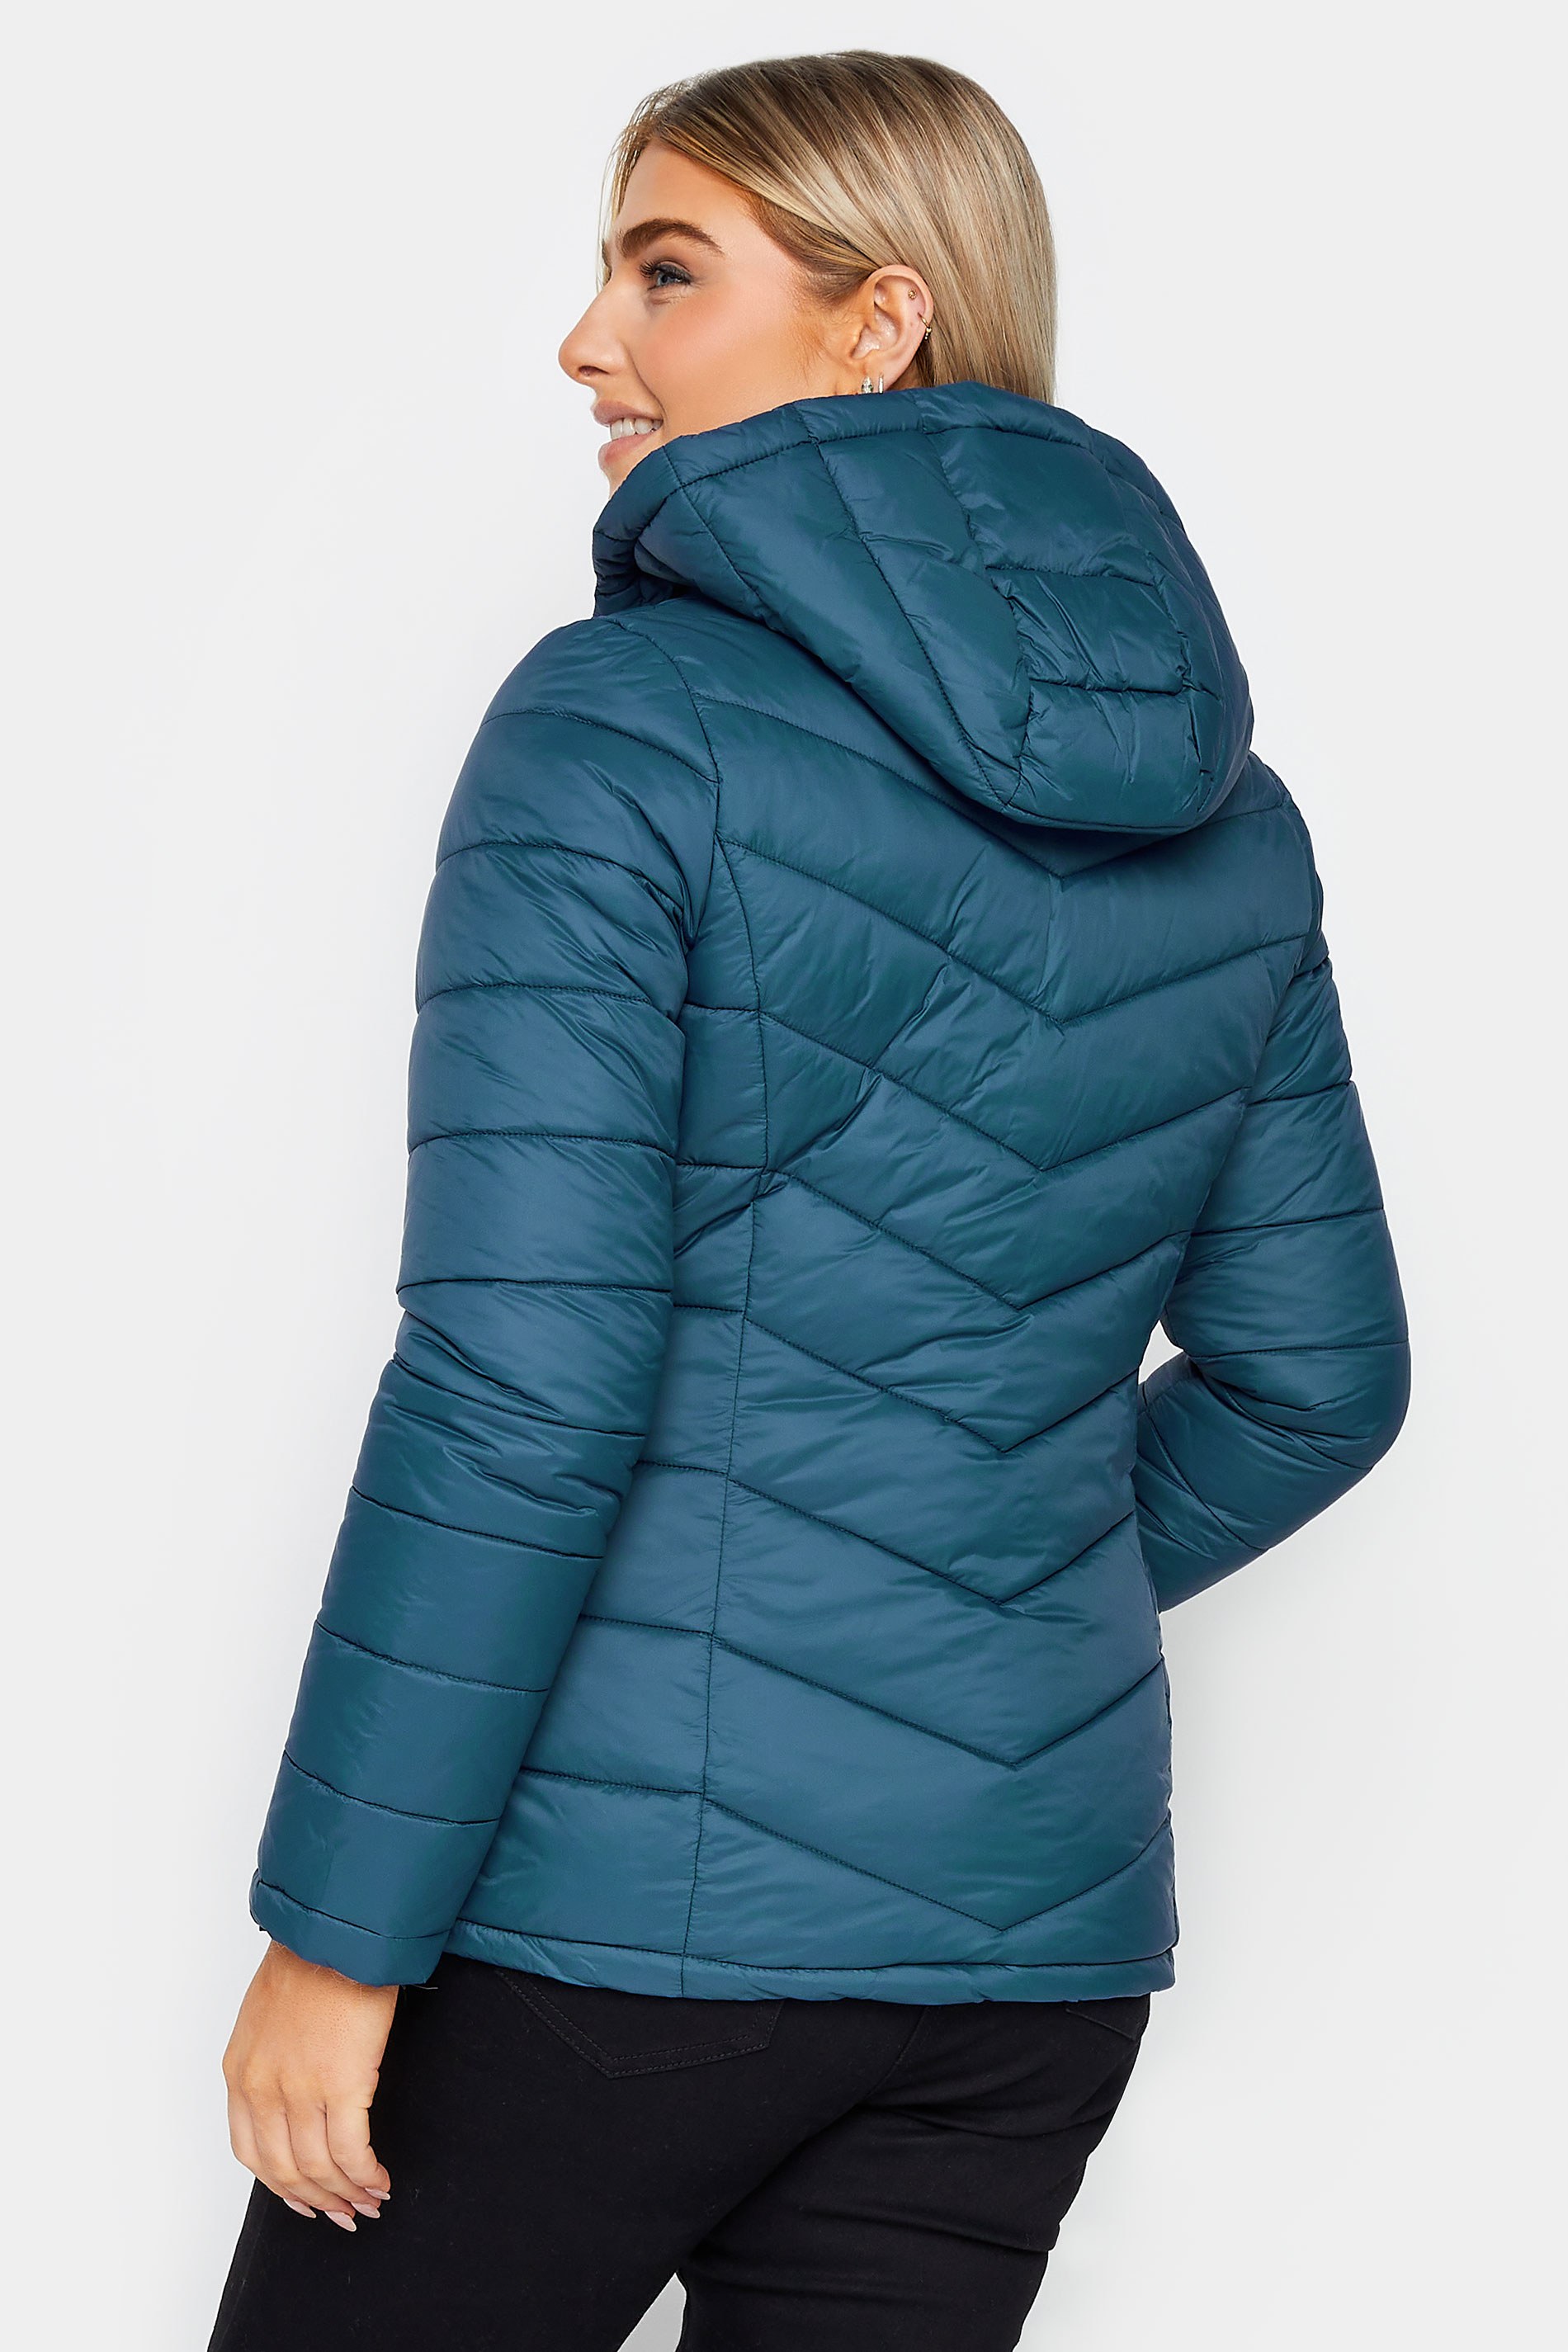 M&Co Teal Blue Quilted Jacket | M&Co 3